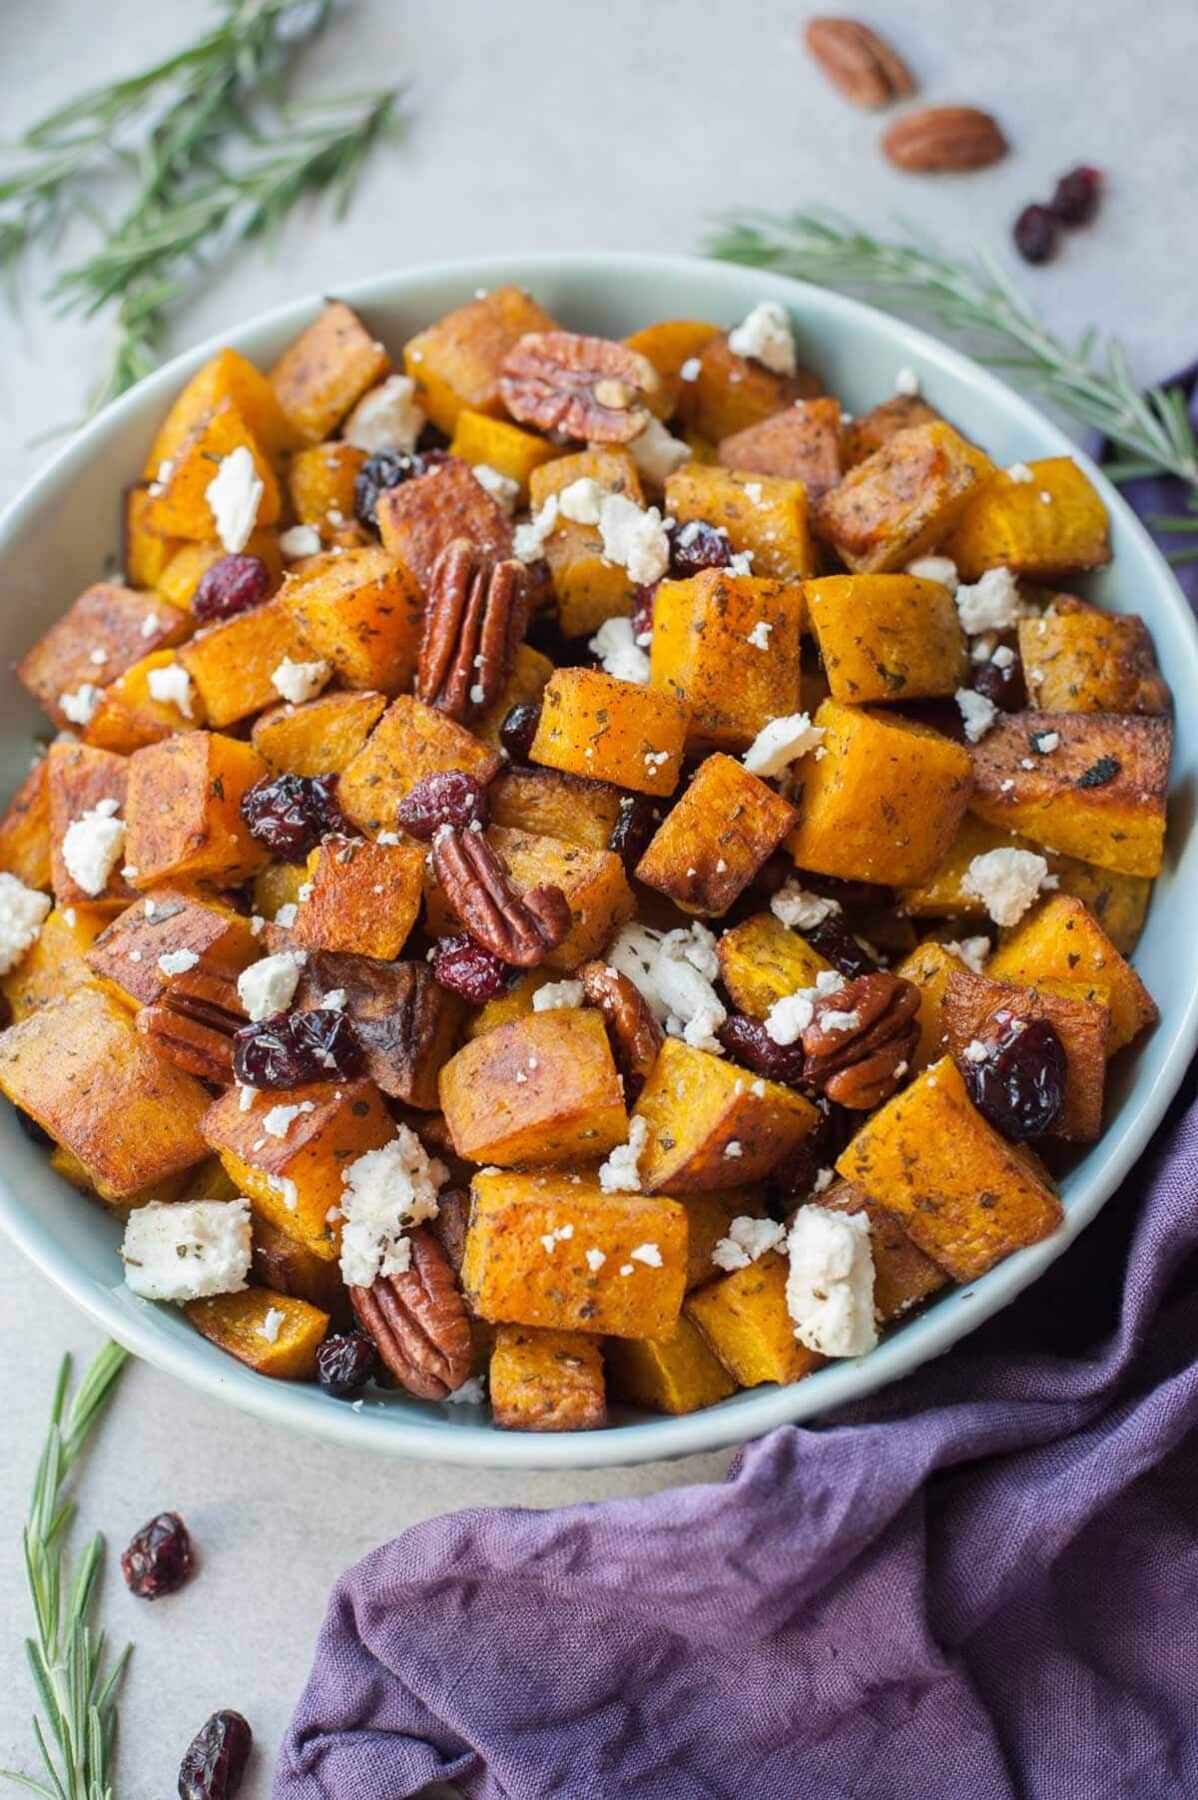 Roasted butternut squash with cranberries, rosemary, pecans, and feta in a blue bowl